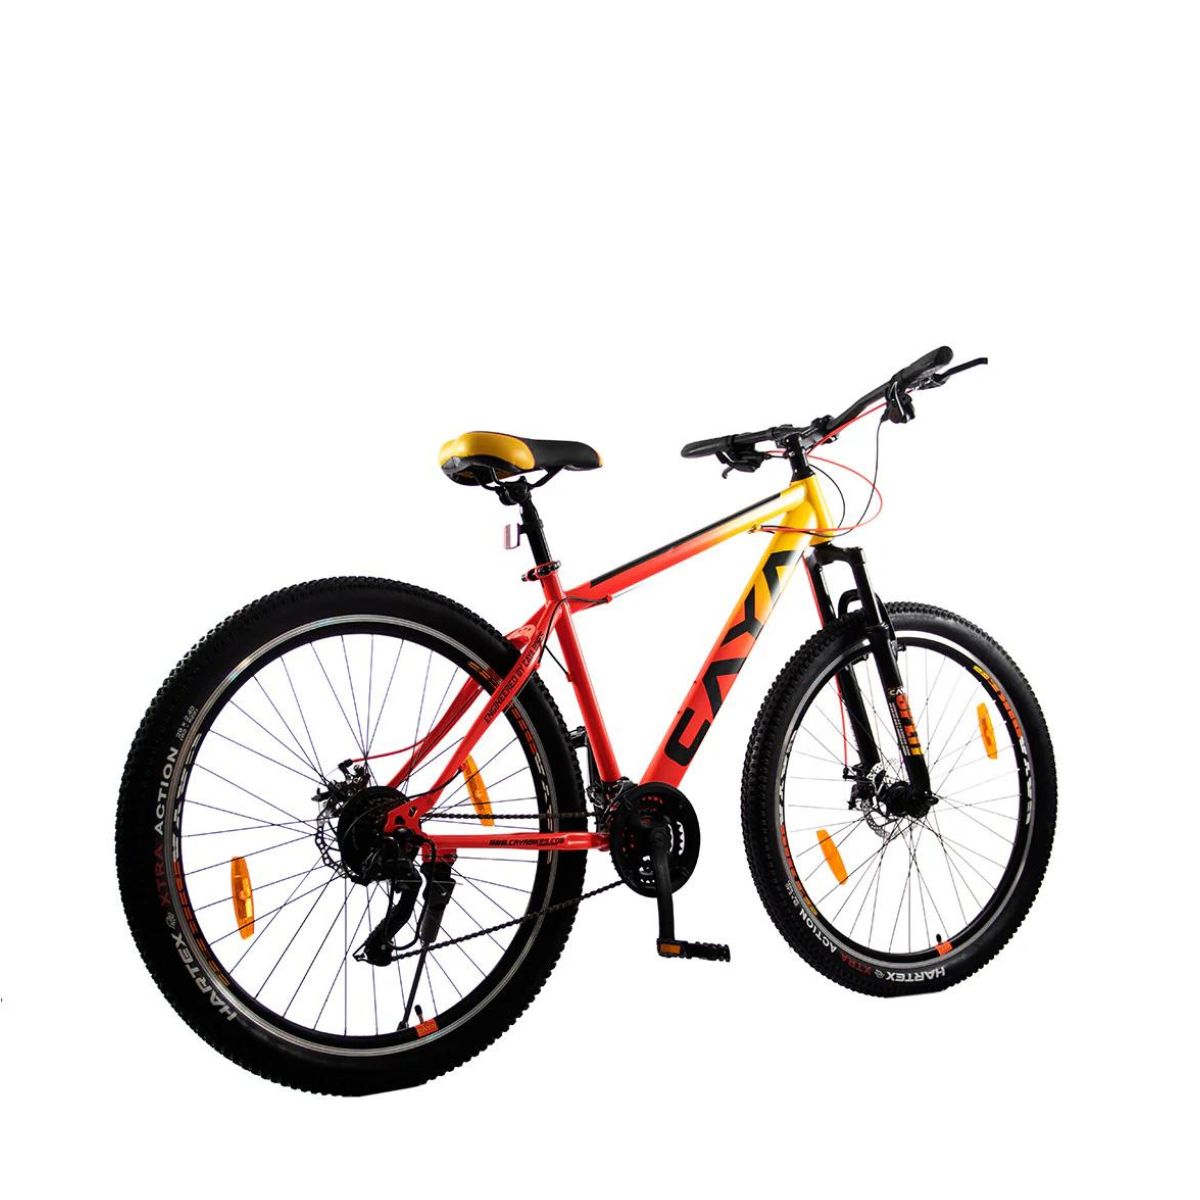 CAYA Split 29 MTB Cycle with Disc Brakes & Suspension 21 Speed Microshift